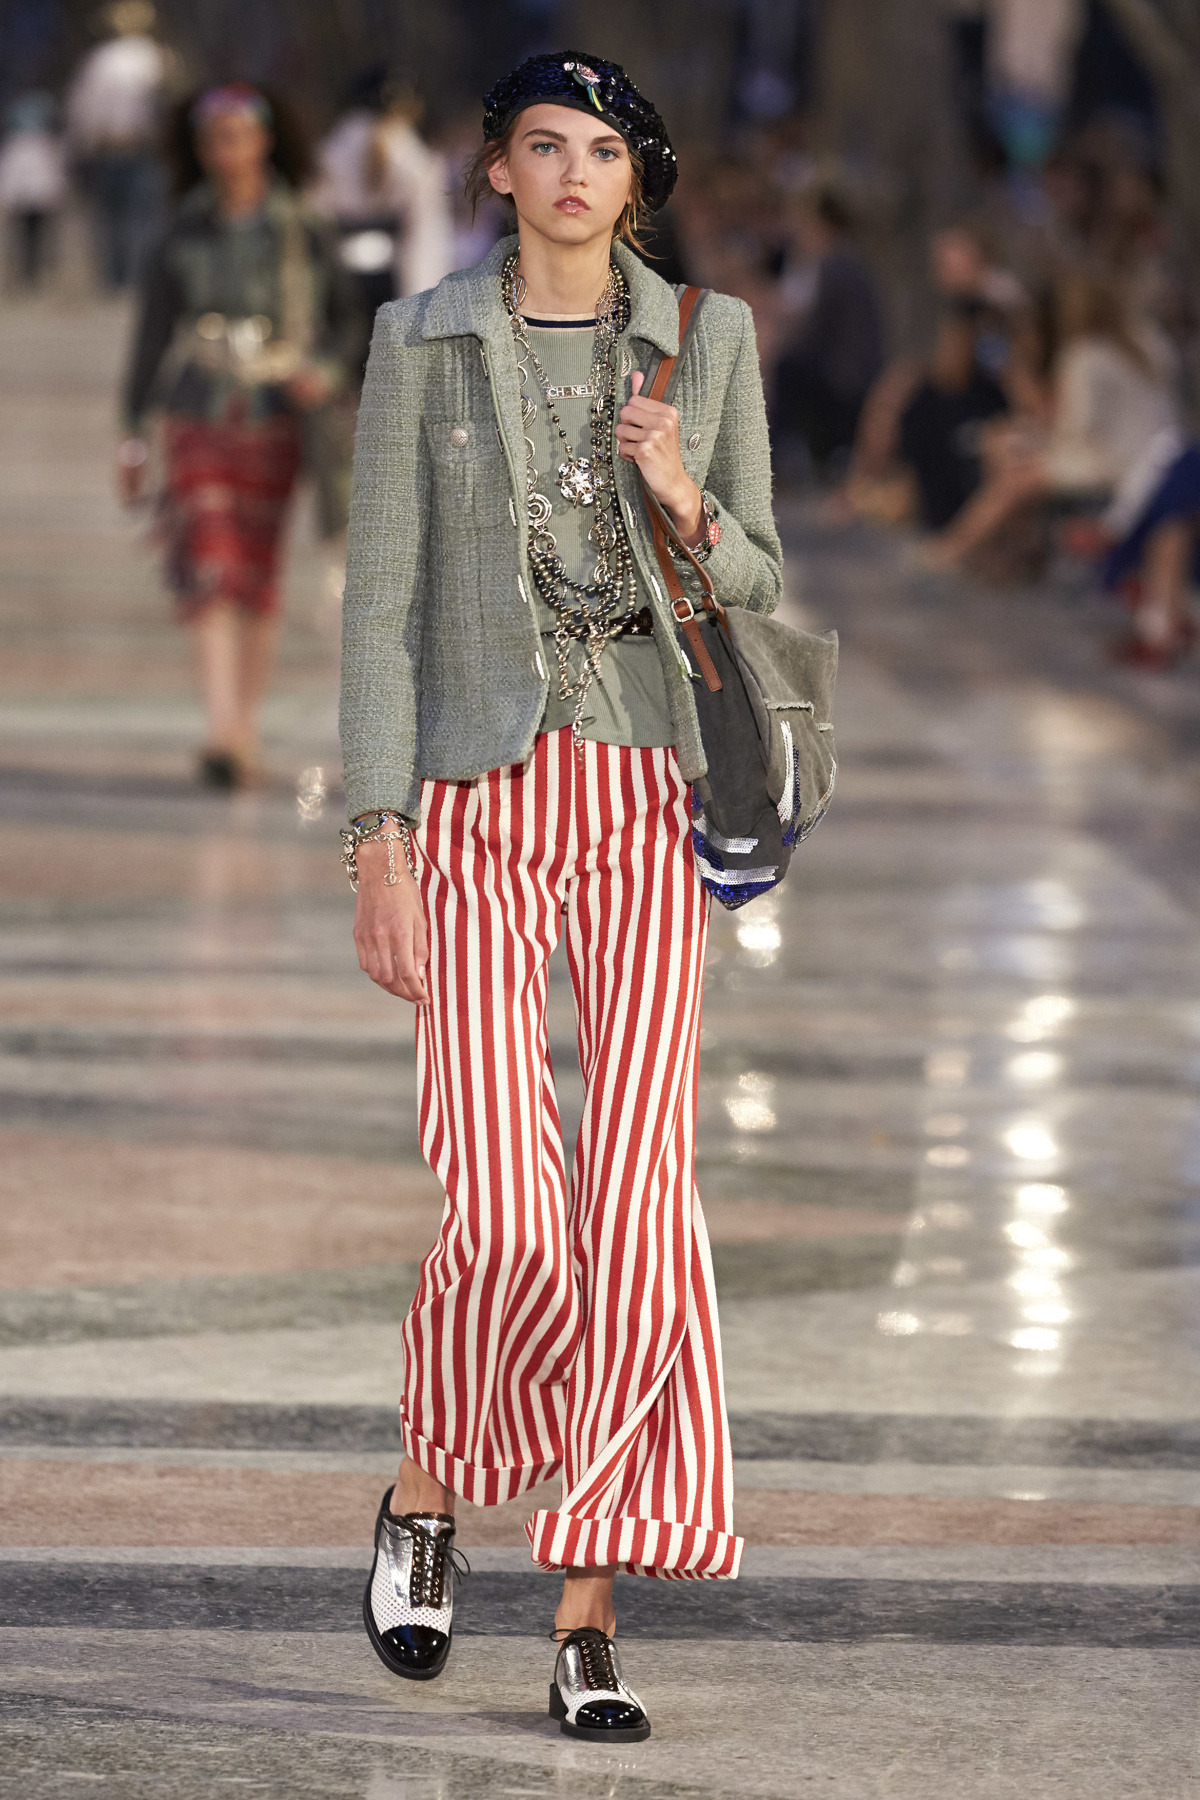 CHANEL RESORT: PART II May 10, 2016 | ZsaZsa Bellagio - Like No Other